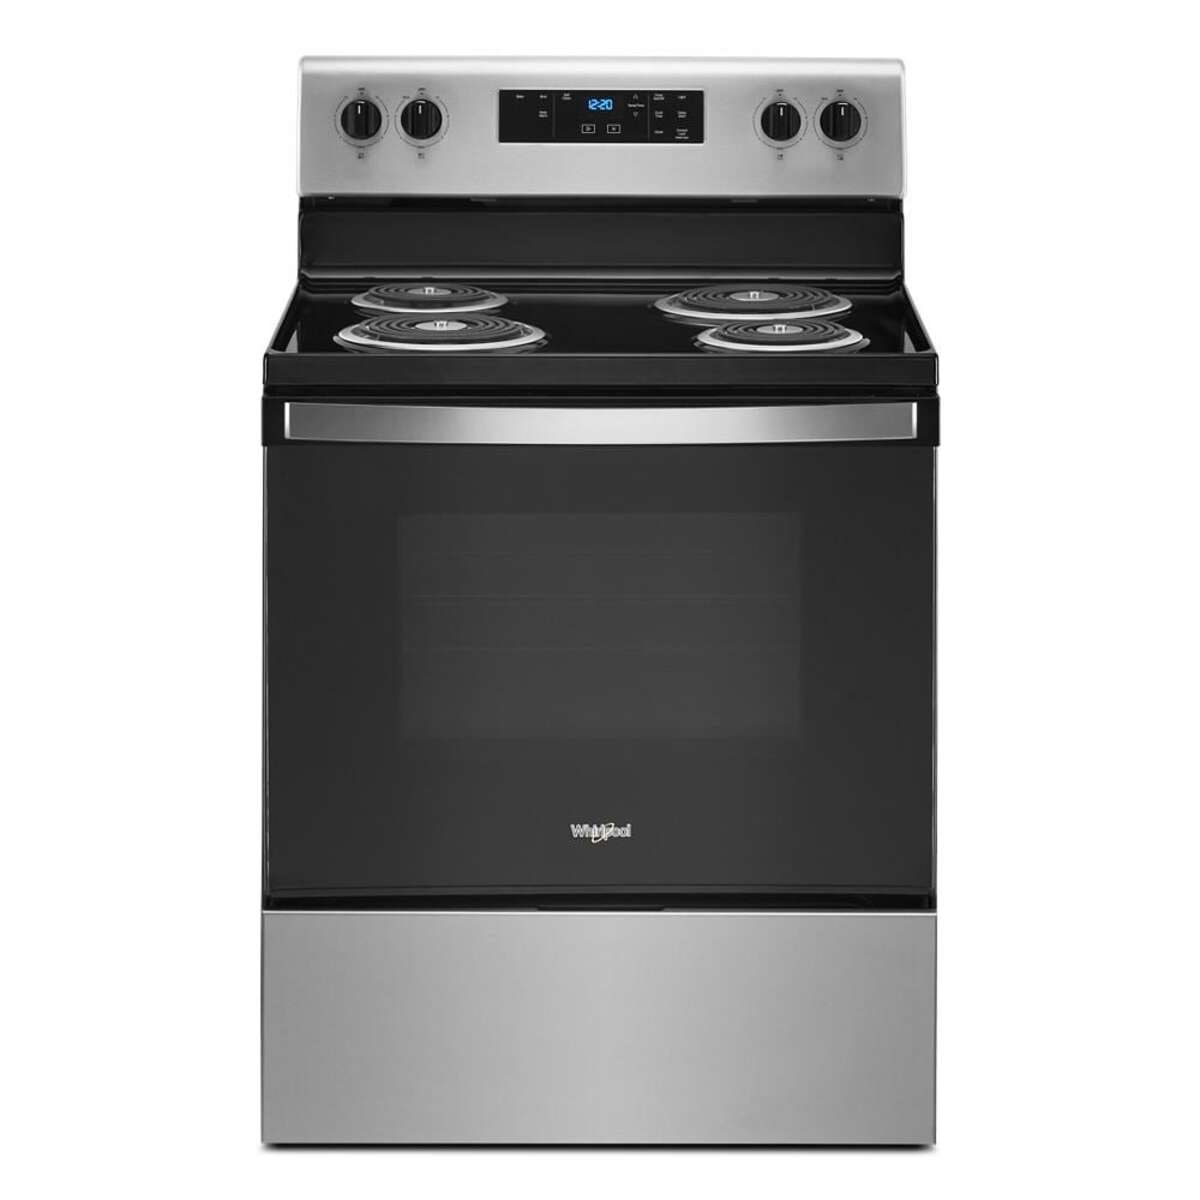 How To Fix The Error Code F30 For Whirlpool Oven & Range